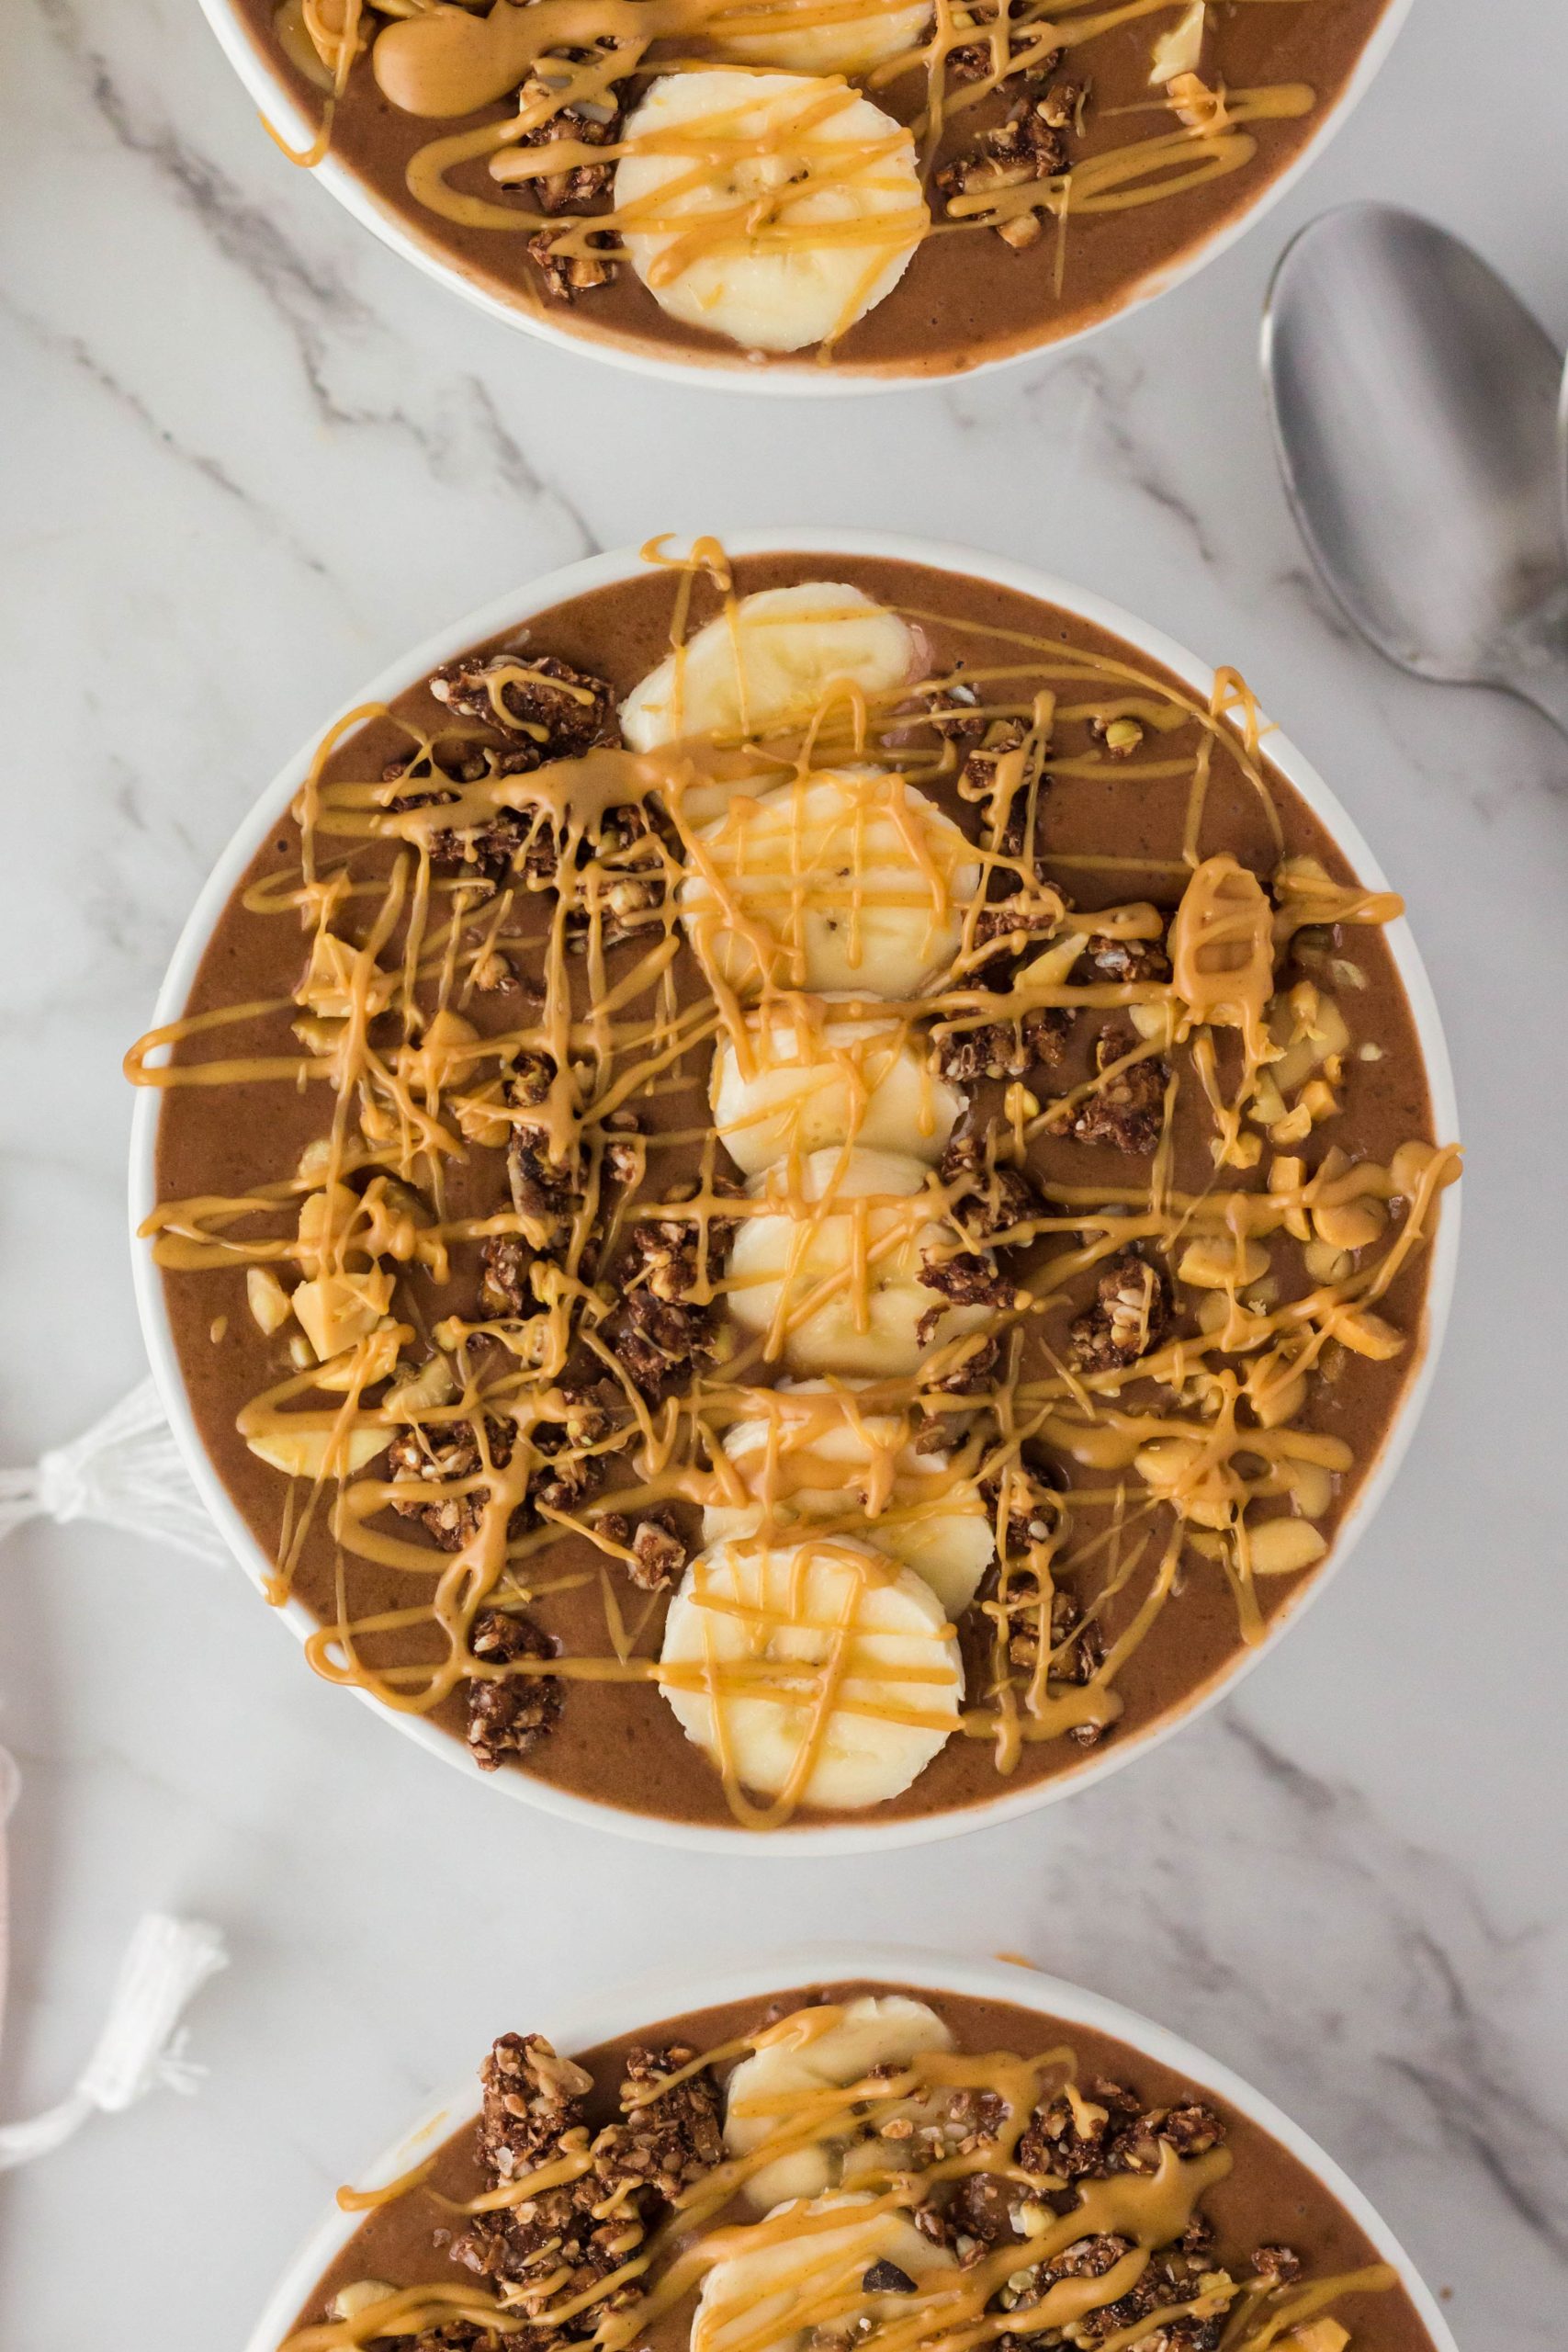 Super delicious and easy to make this Chocolate Peanut Butter Smoothie Bowl is comfort in a bowl. Filled with bananas, cacao powder, peanut butter, and dates you can enjoy this smoothie bowl guilt-free!